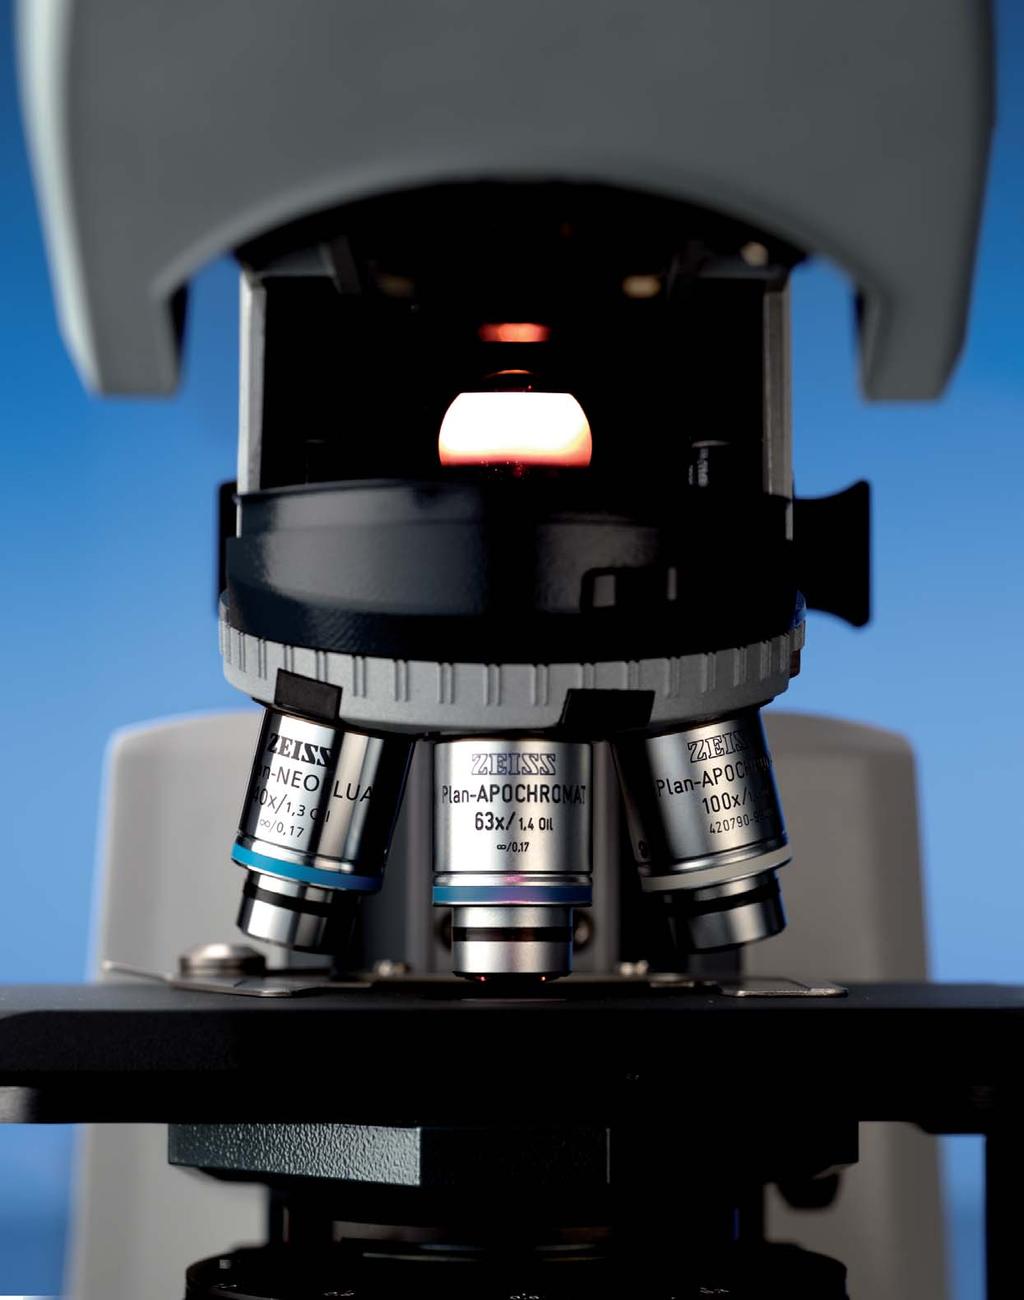 Microscopy from Carl Zeiss Axio Scope More functional. More economical.